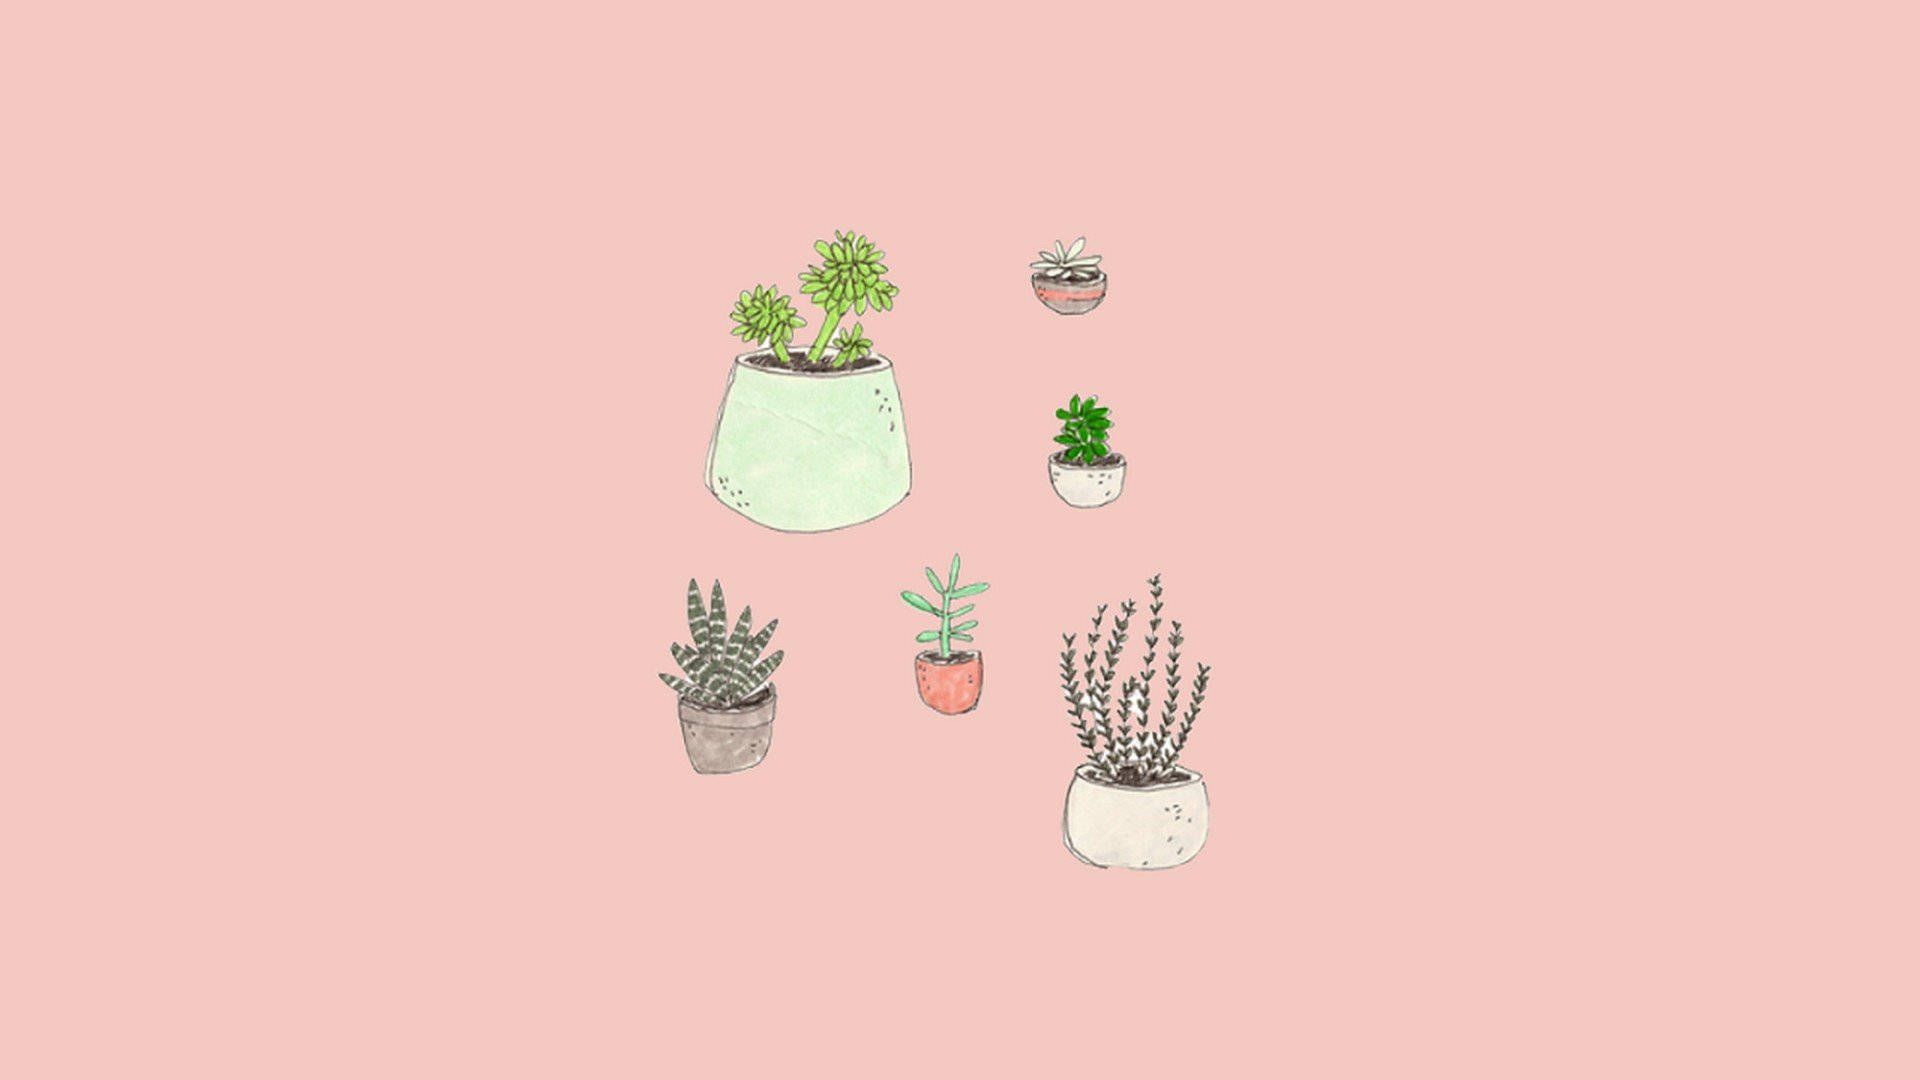 A collection of potted plants on a pink background - Cute